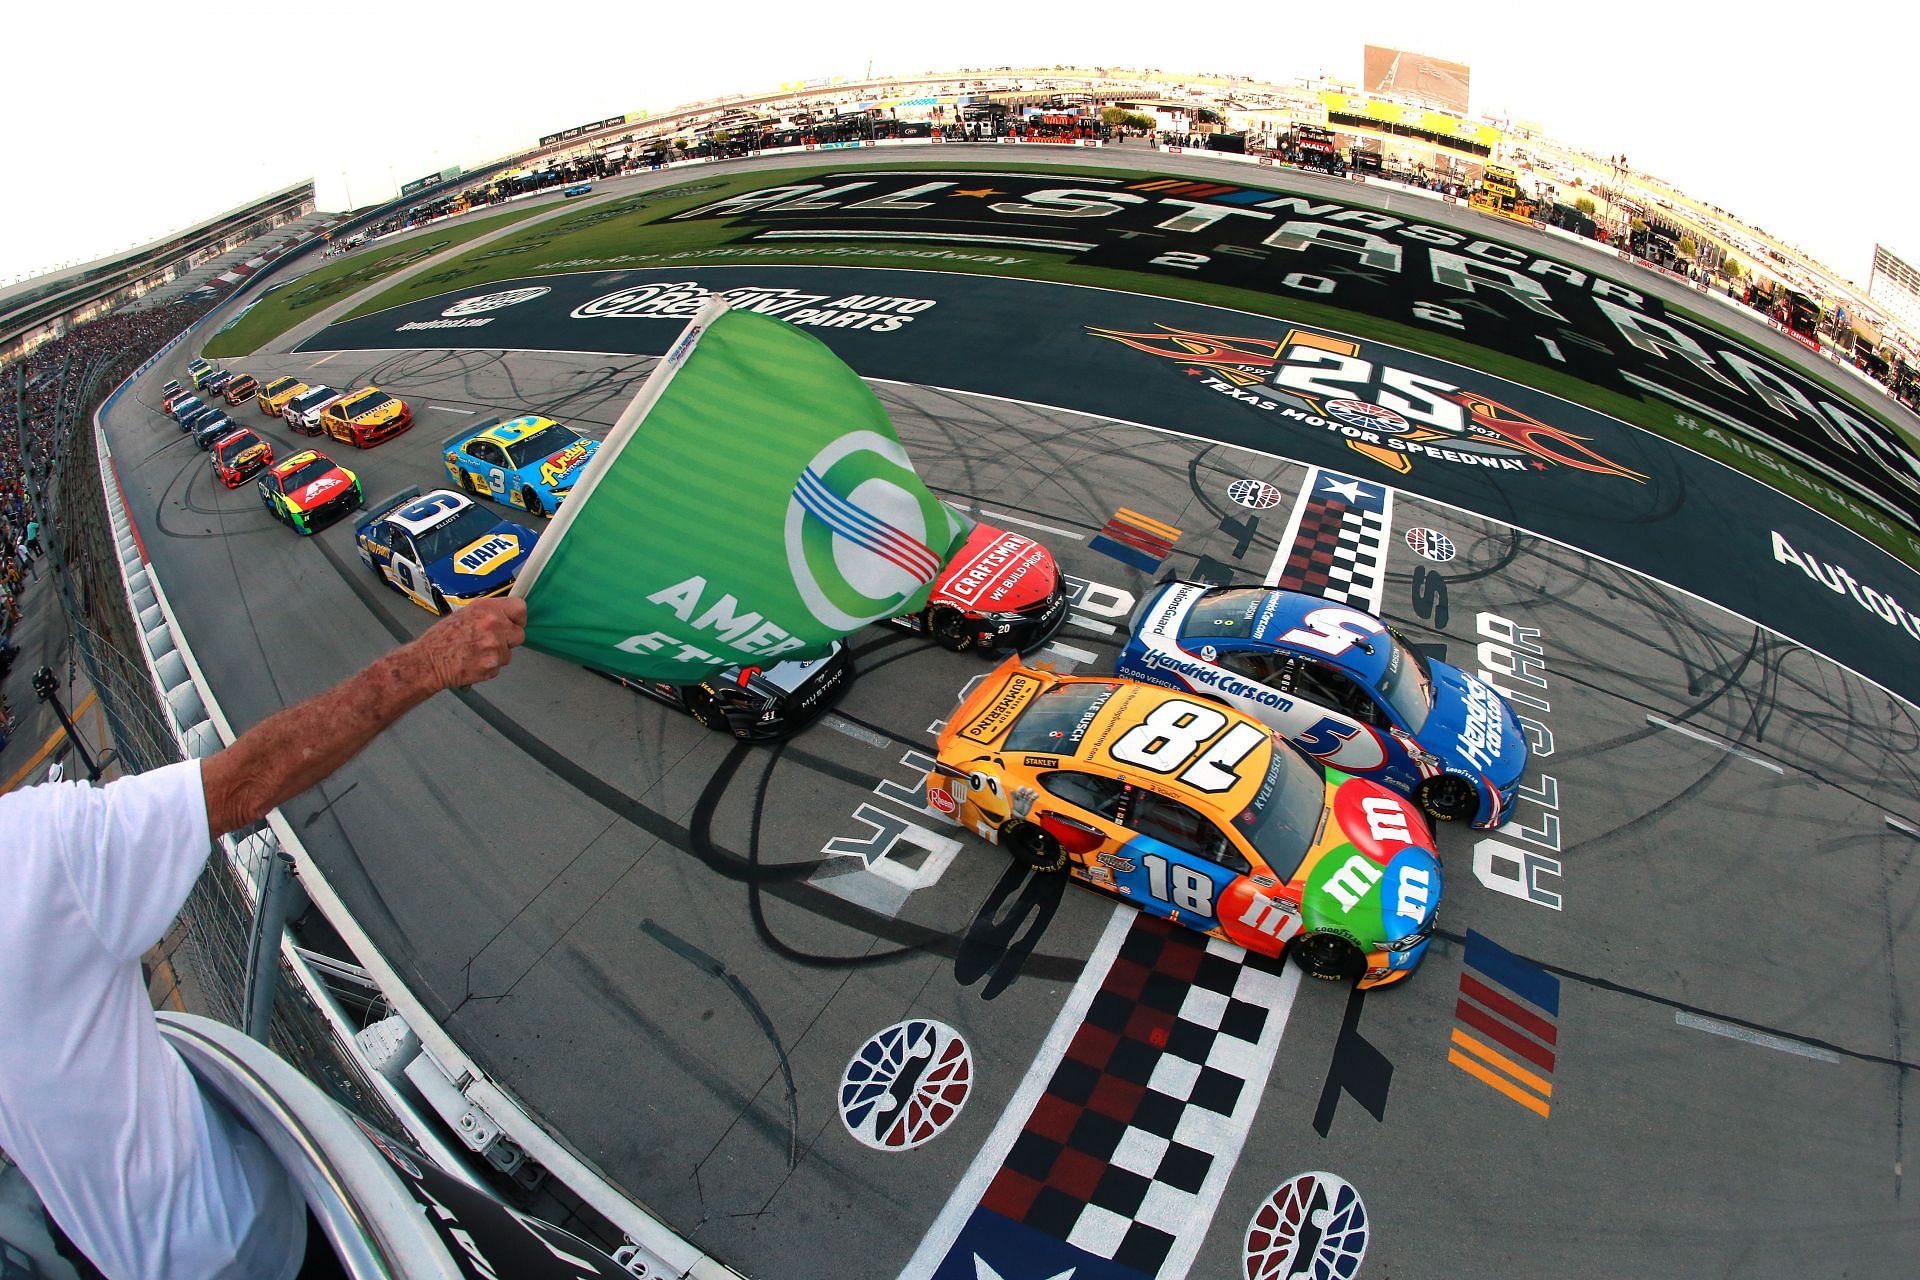 Kyle Busch and Kyle Larson lead the field to the green flag to start the 2021 NASCAR All-Star Race at Texas Motor Speedway in Fort Worth, Texas  (Photo by Sean Gardner/Getty Images)